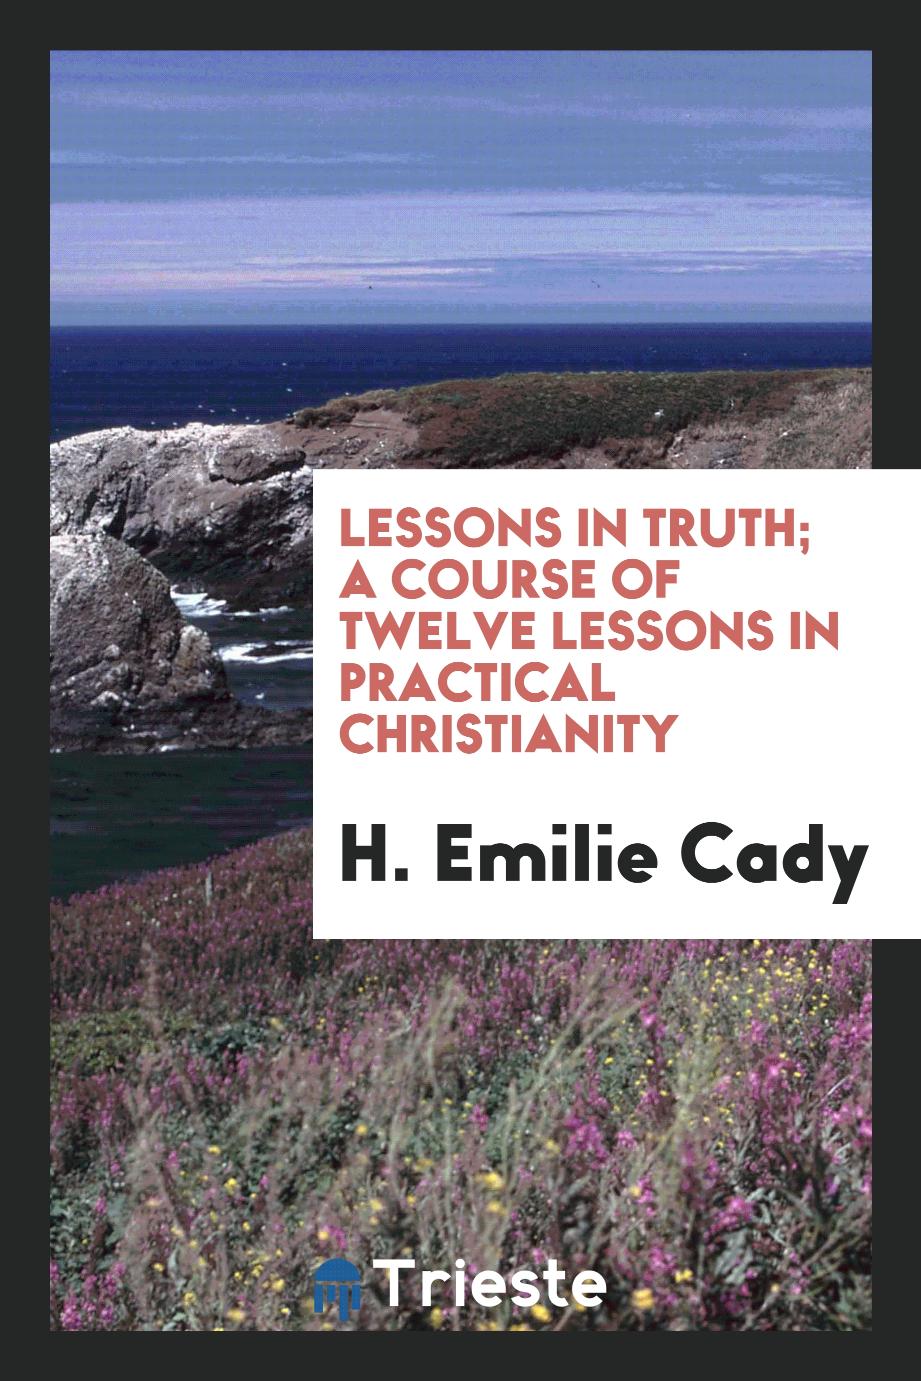 Lessons in truth; a course of twelve lessons in practical Christianity